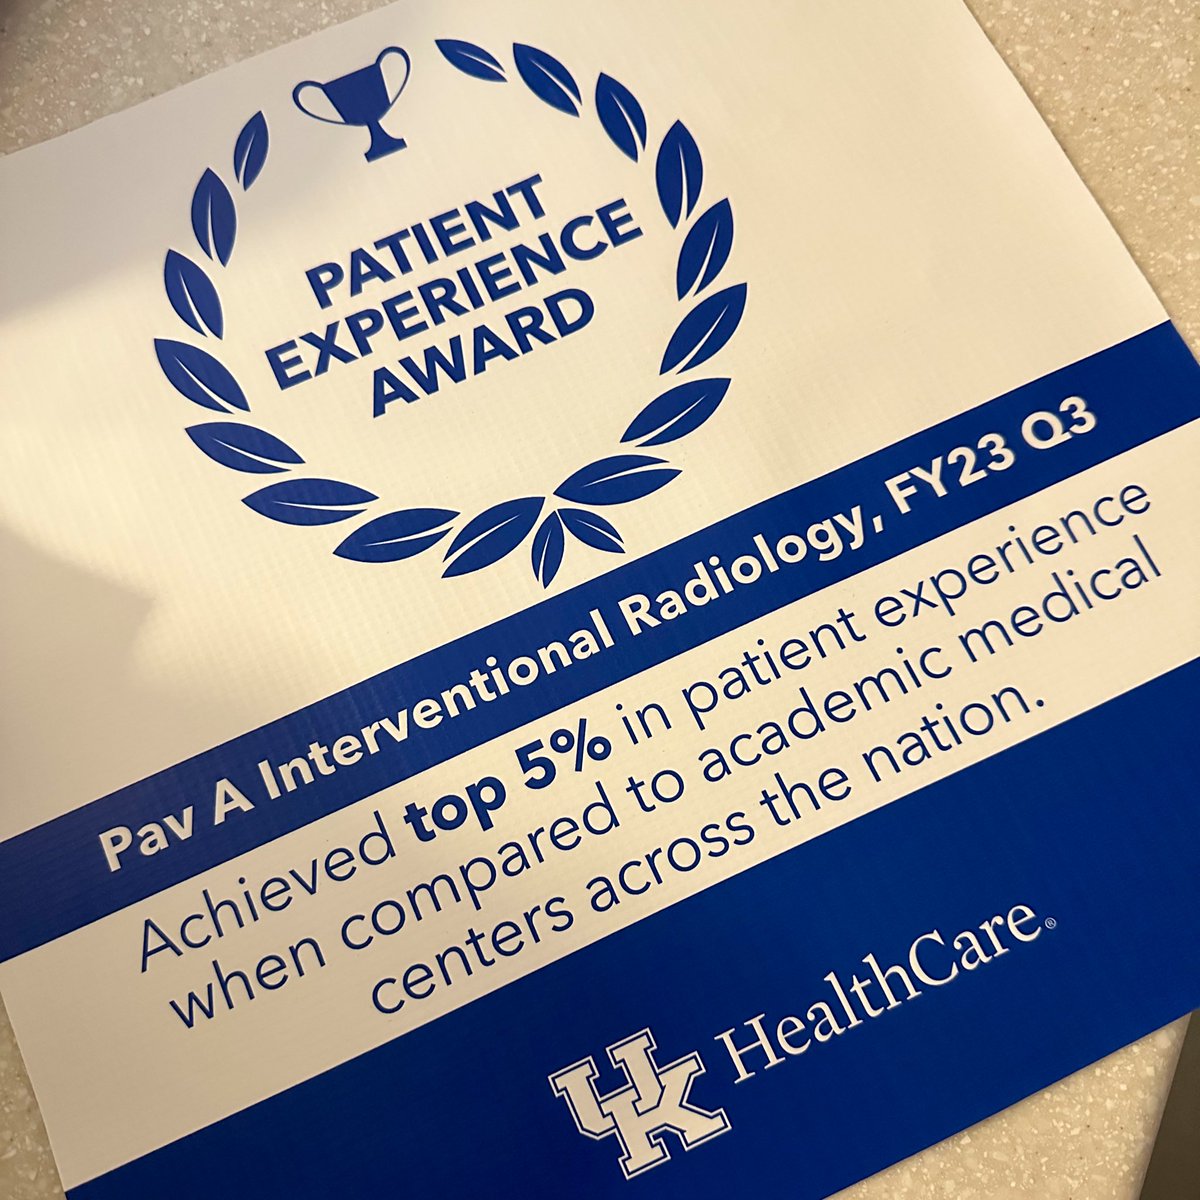 Thank you to all the @UKY_IR faculty and staff for all the hard work! This is amazing! @UK_HealthCare @UKyRadiology #IRad